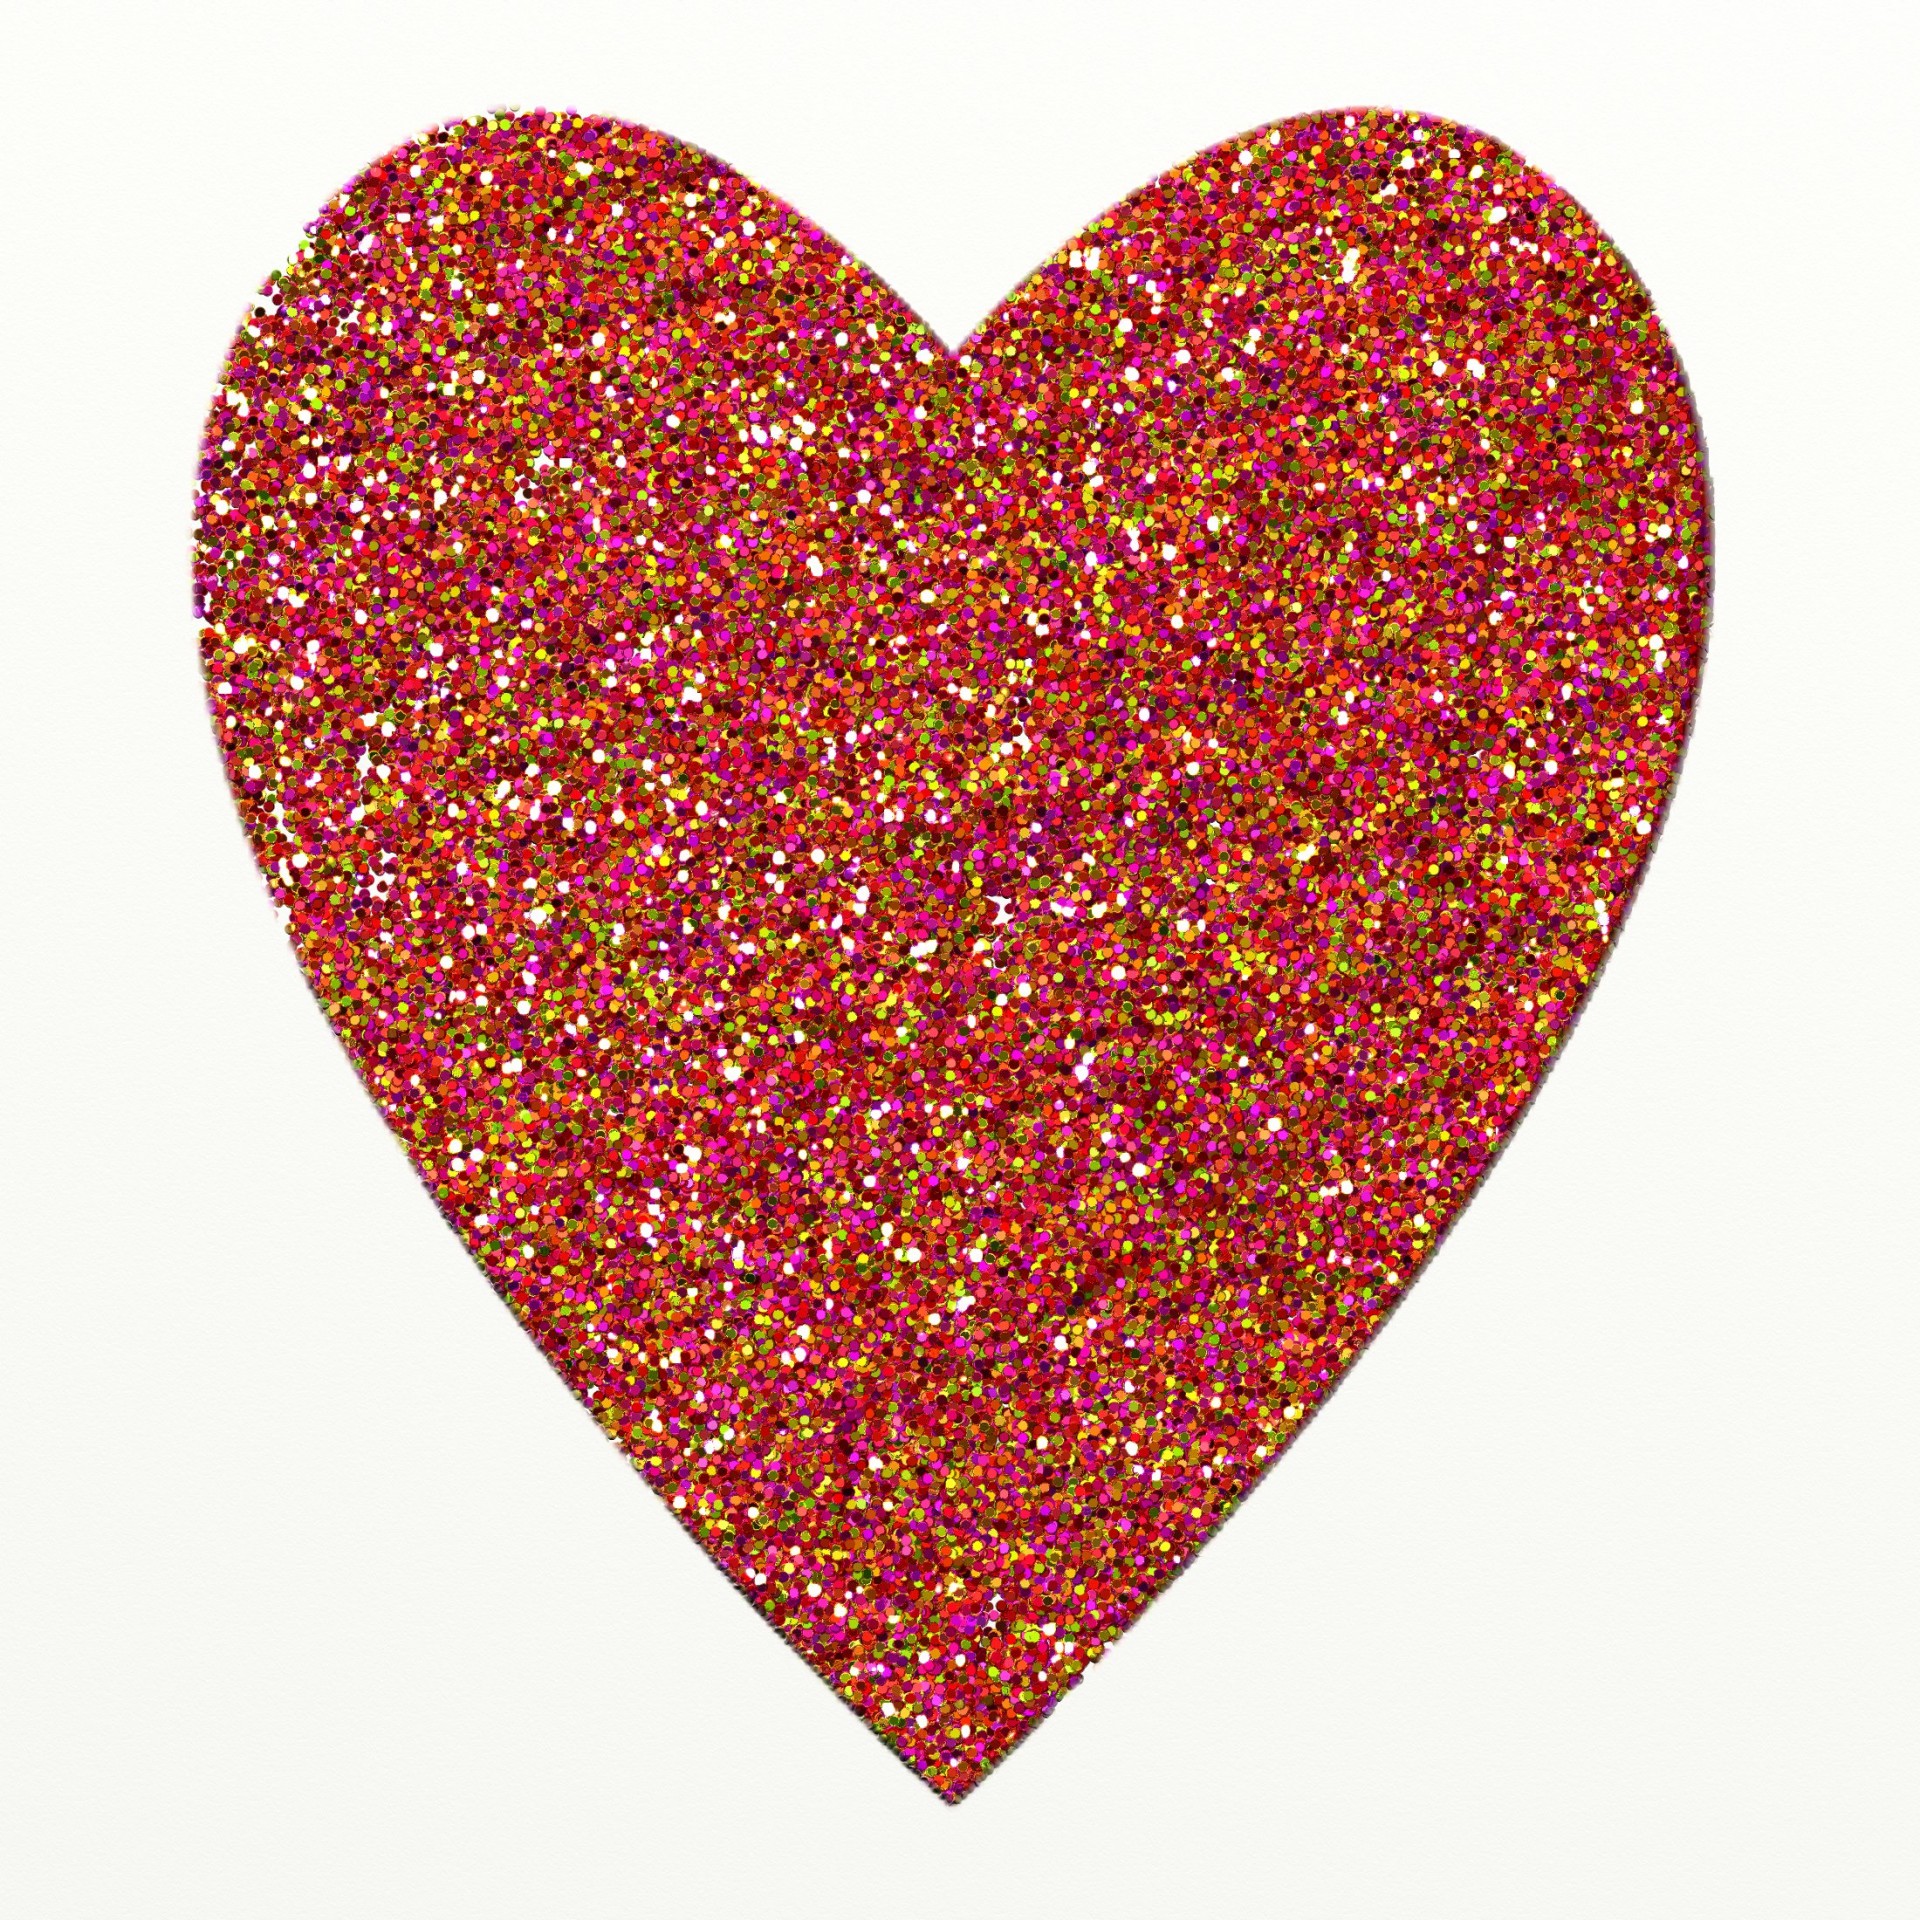 Illustration of a simple heart shape made up of colourful glitter.